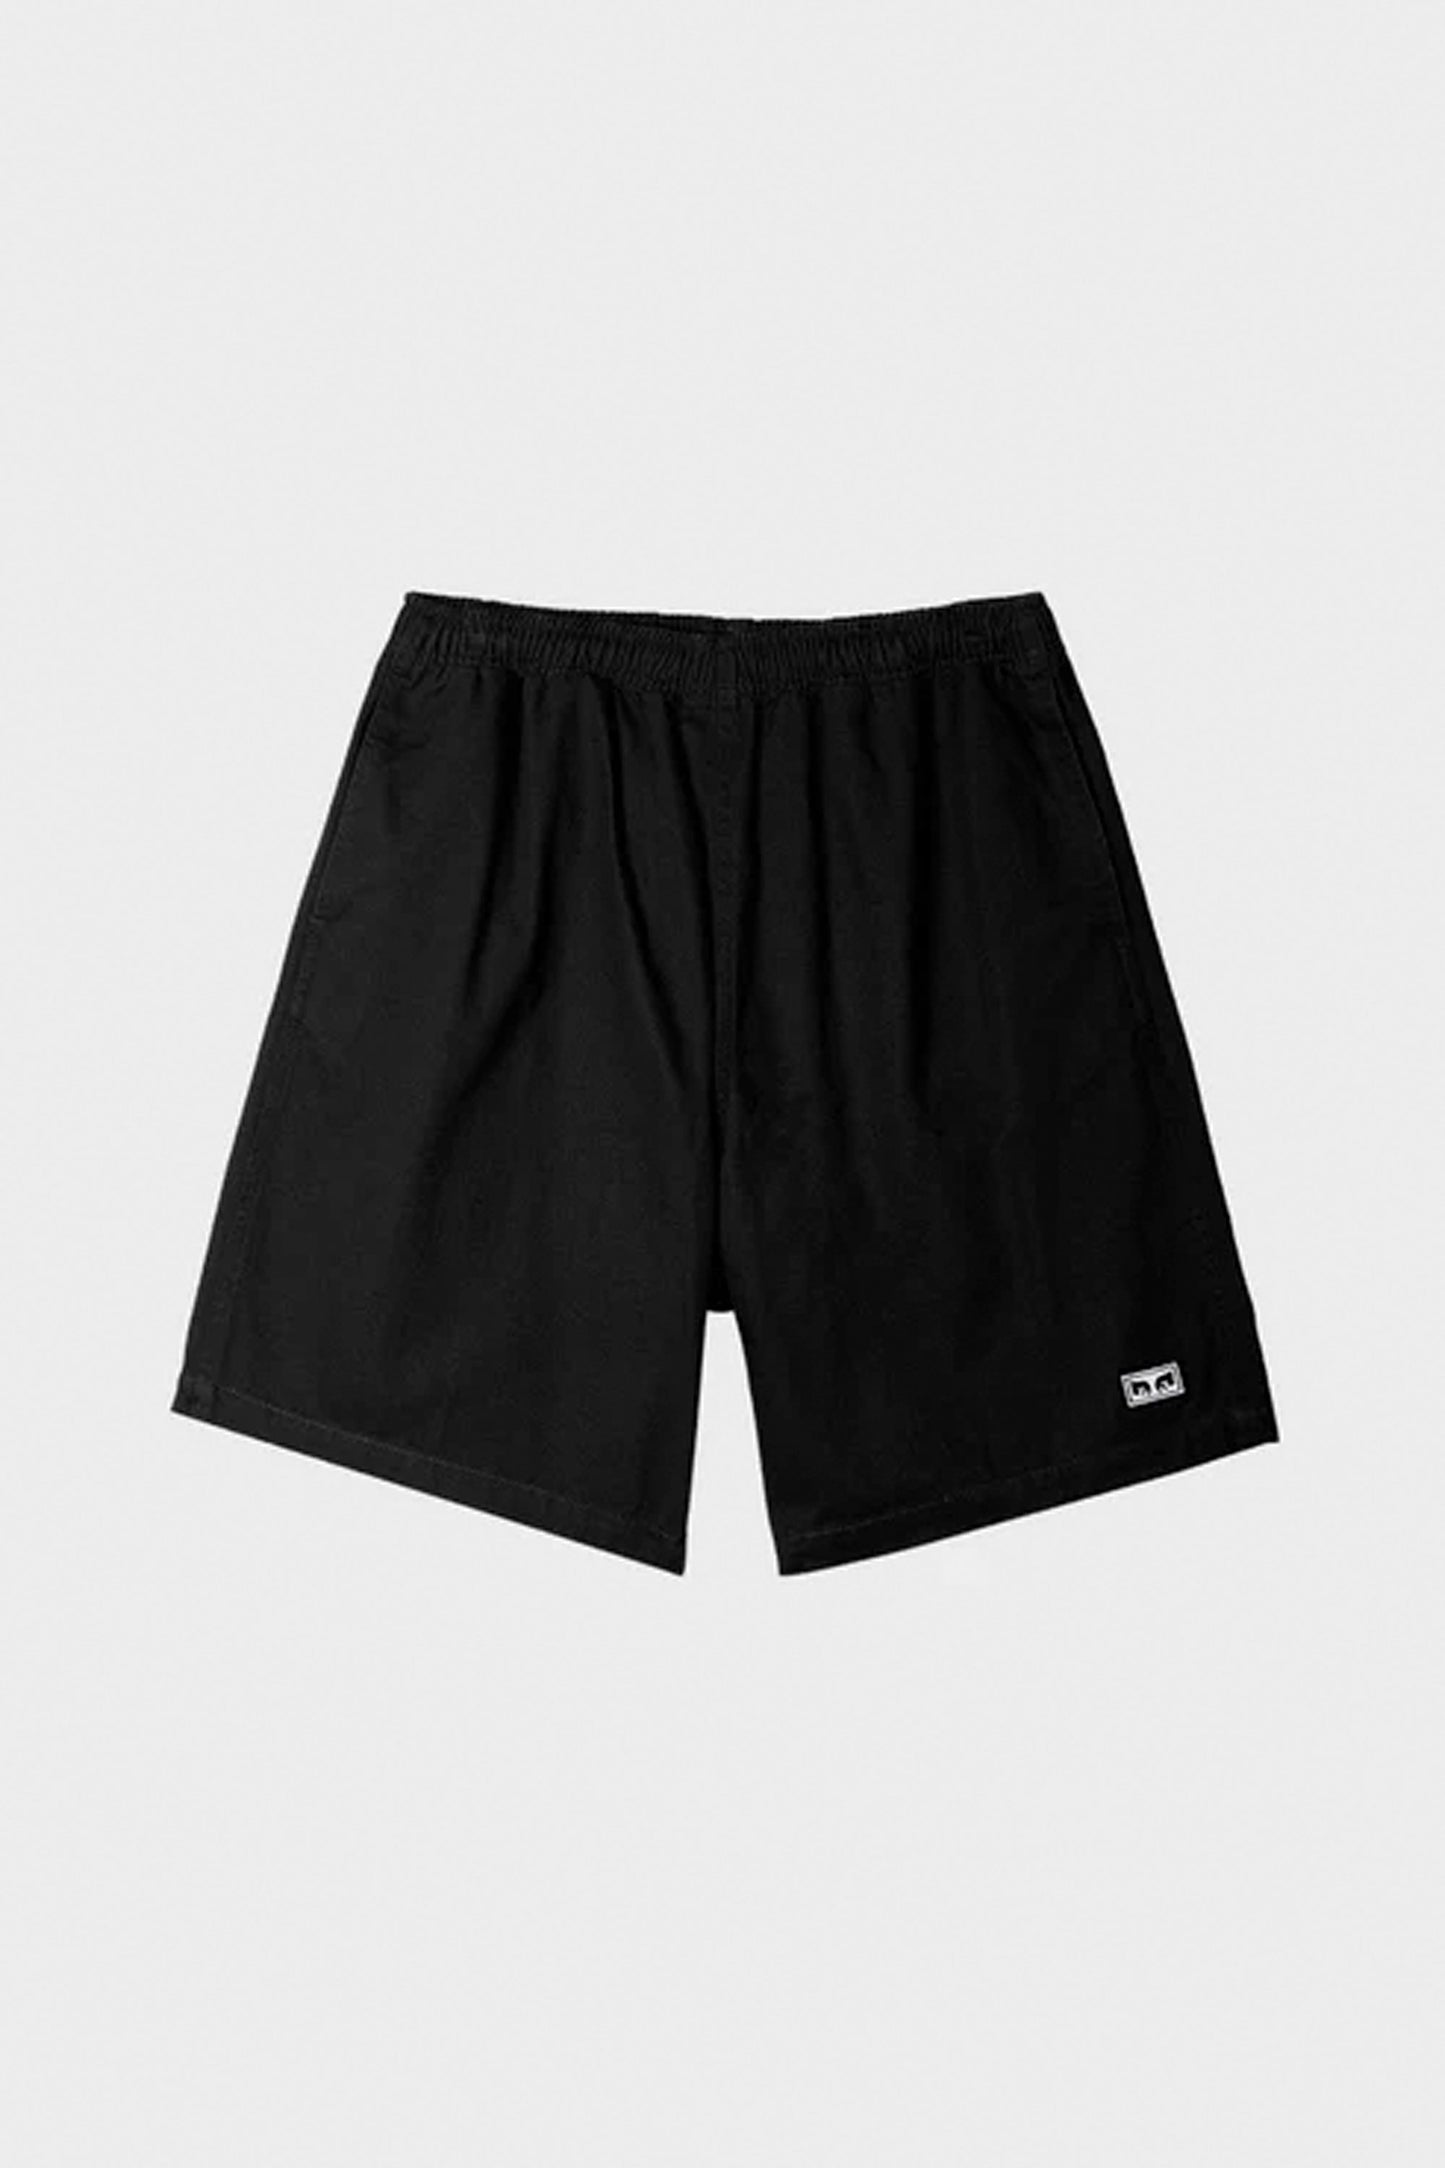 Pukas-surf-shop-man-shorts-Easy-Relaxed-Twill-Short-Black